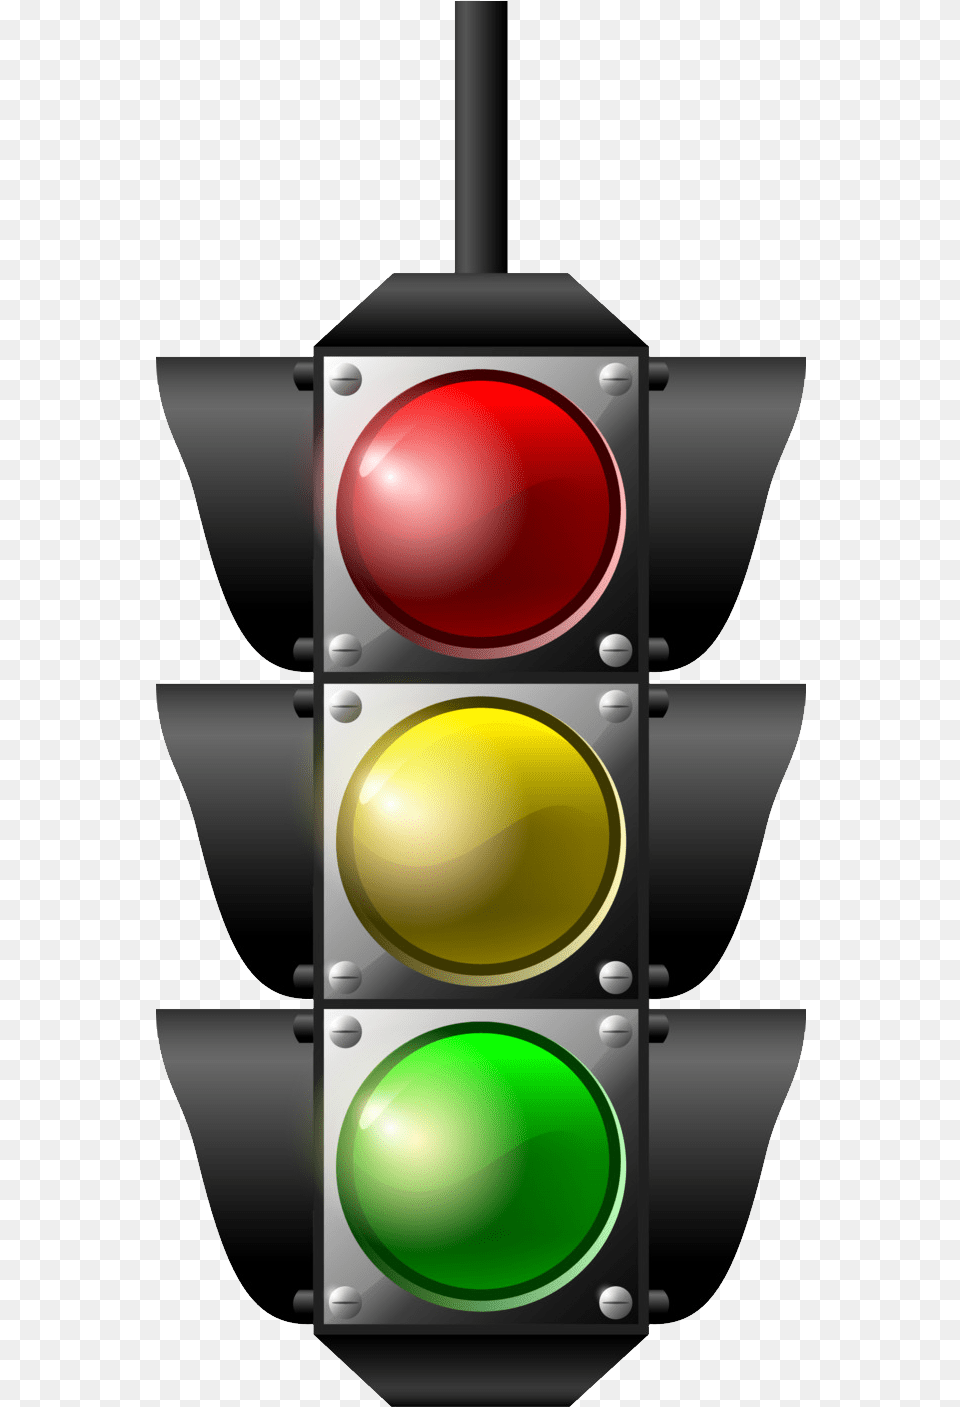 Traffic Light Traffic Rules Images Download, Traffic Light Png Image